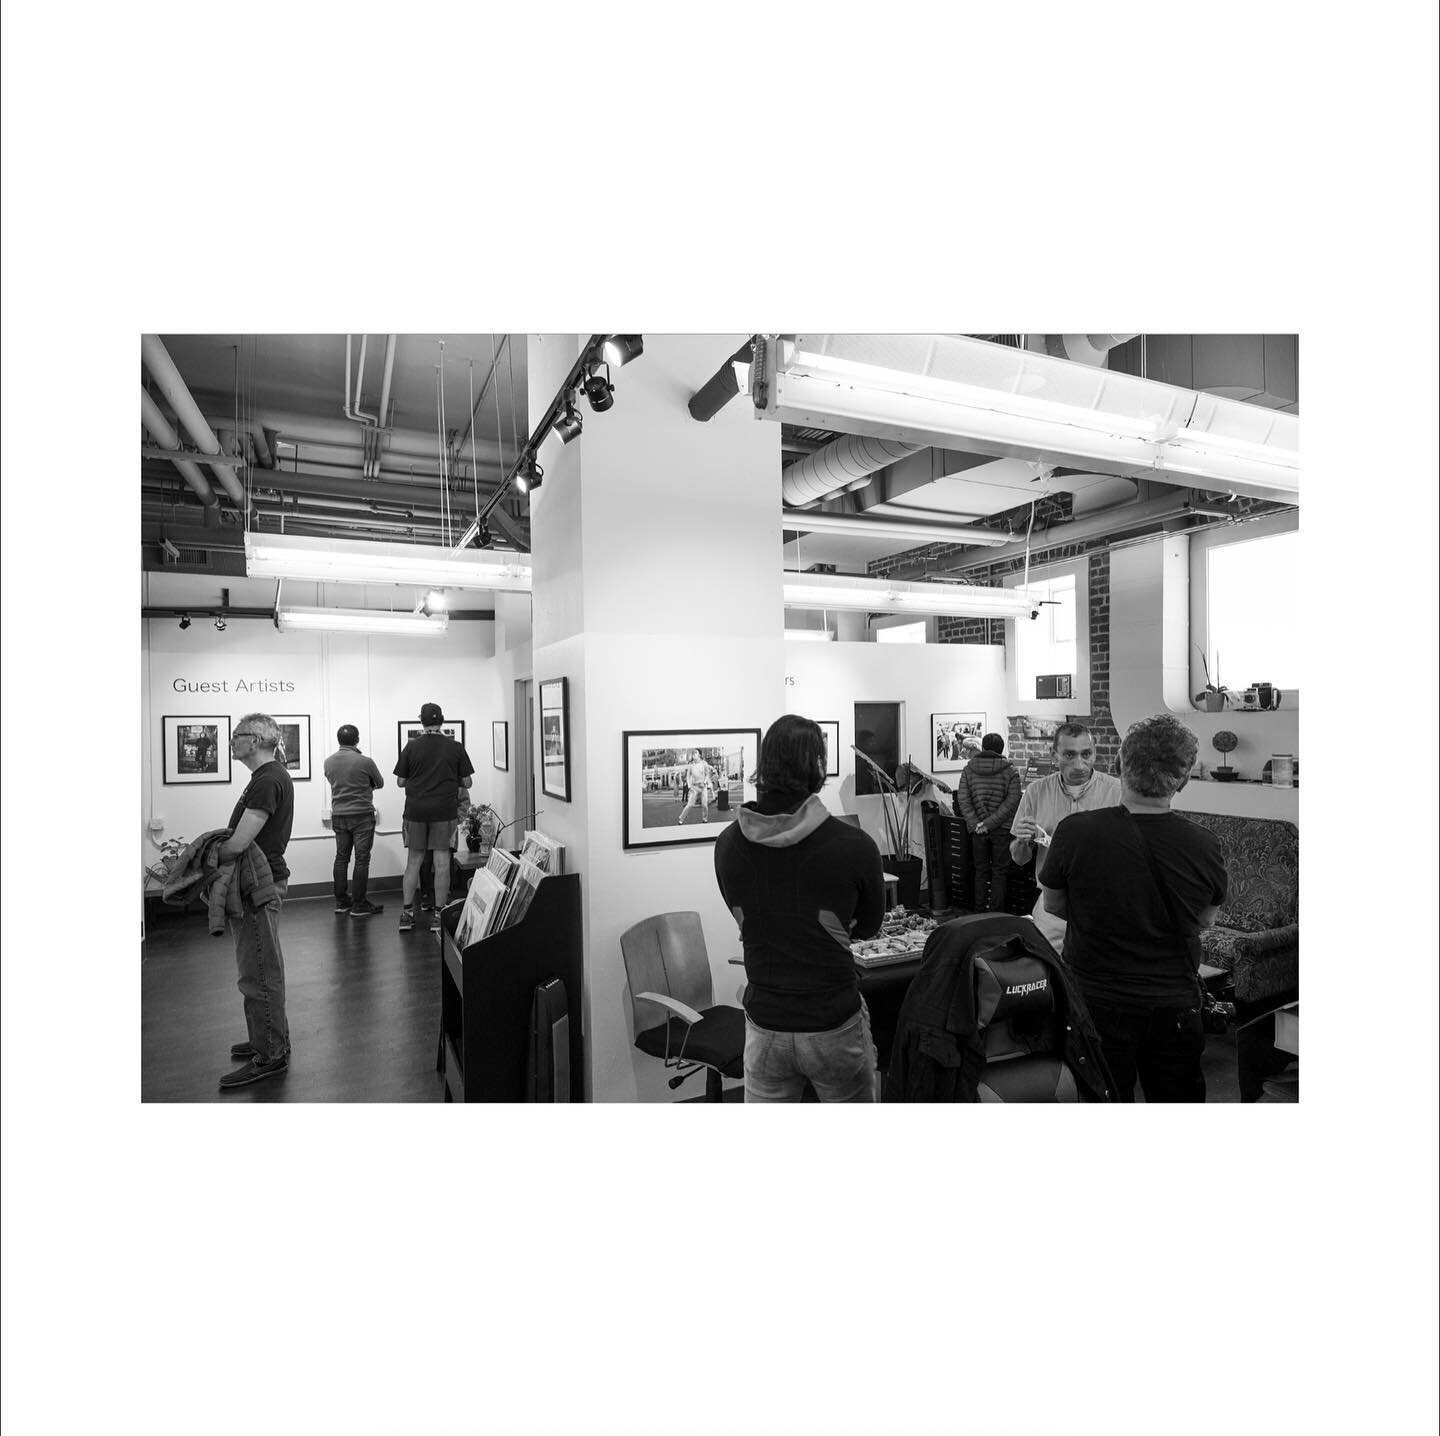 Thanks to all who came out this past weekend to our opening reception for an SF street photo and a variety of group work!

Great discussion led by Gabriel Castillo about street photo conundrums and considerations. We hope you&rsquo;ll come check out 